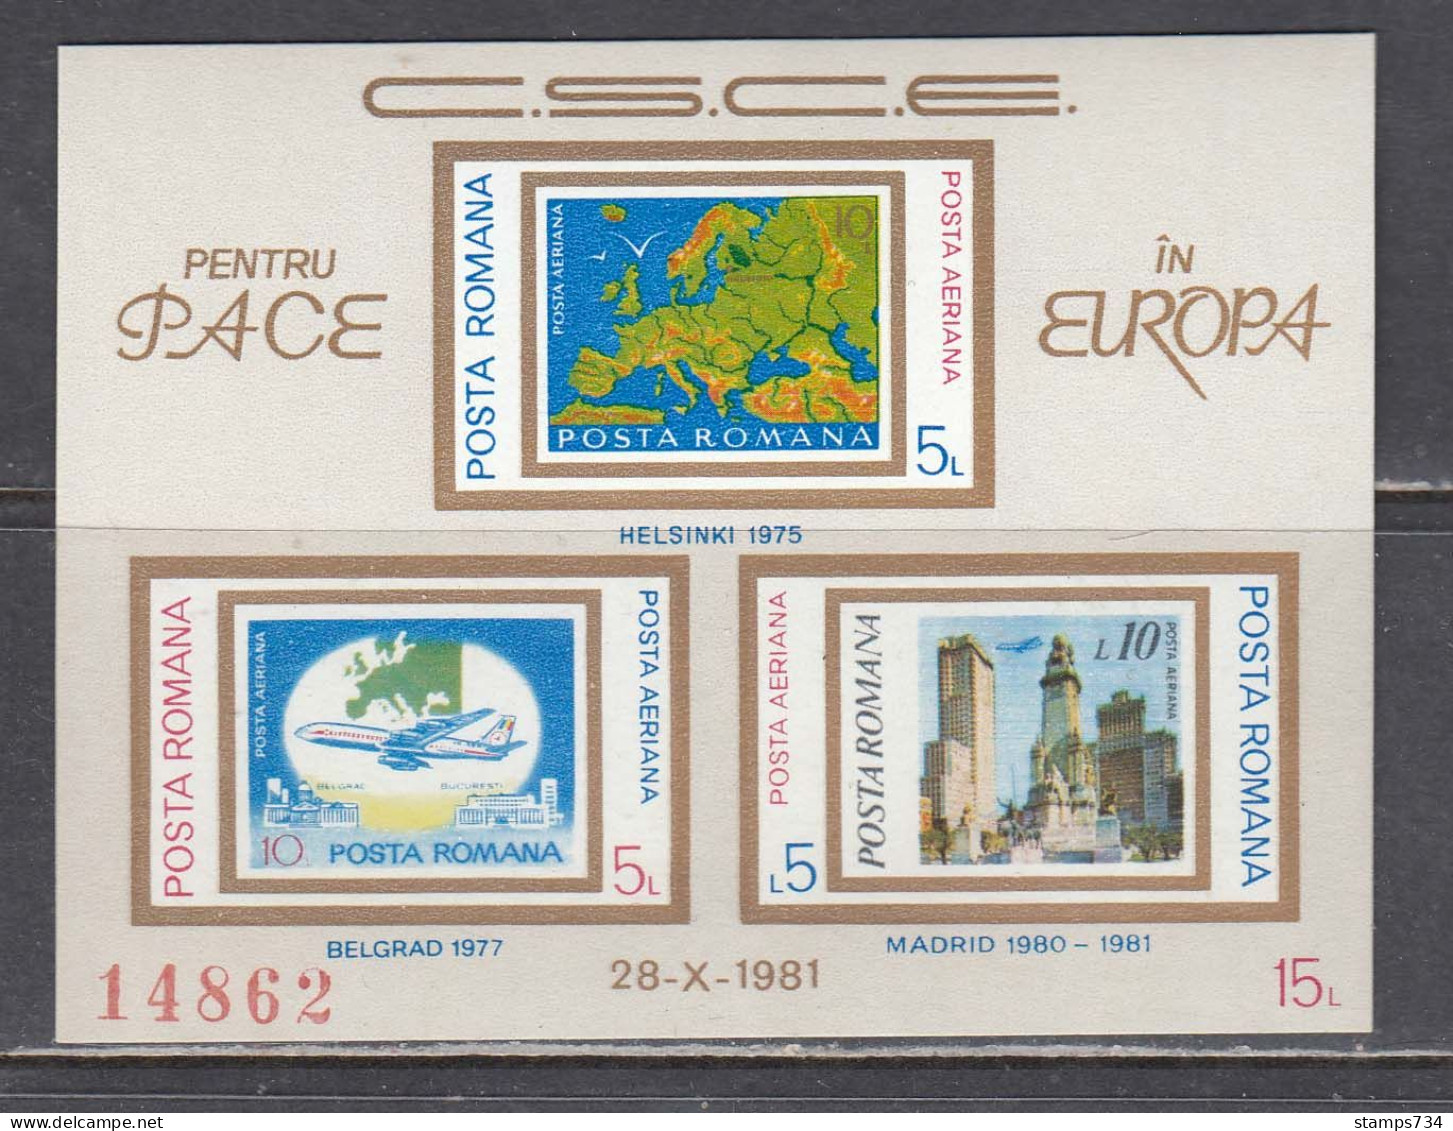 Romania 1981 - Conference On Security And Cooperation In Europe (CSCE), Madrid, Mi-Nr. Bl. 183, MNH** - Ungebraucht